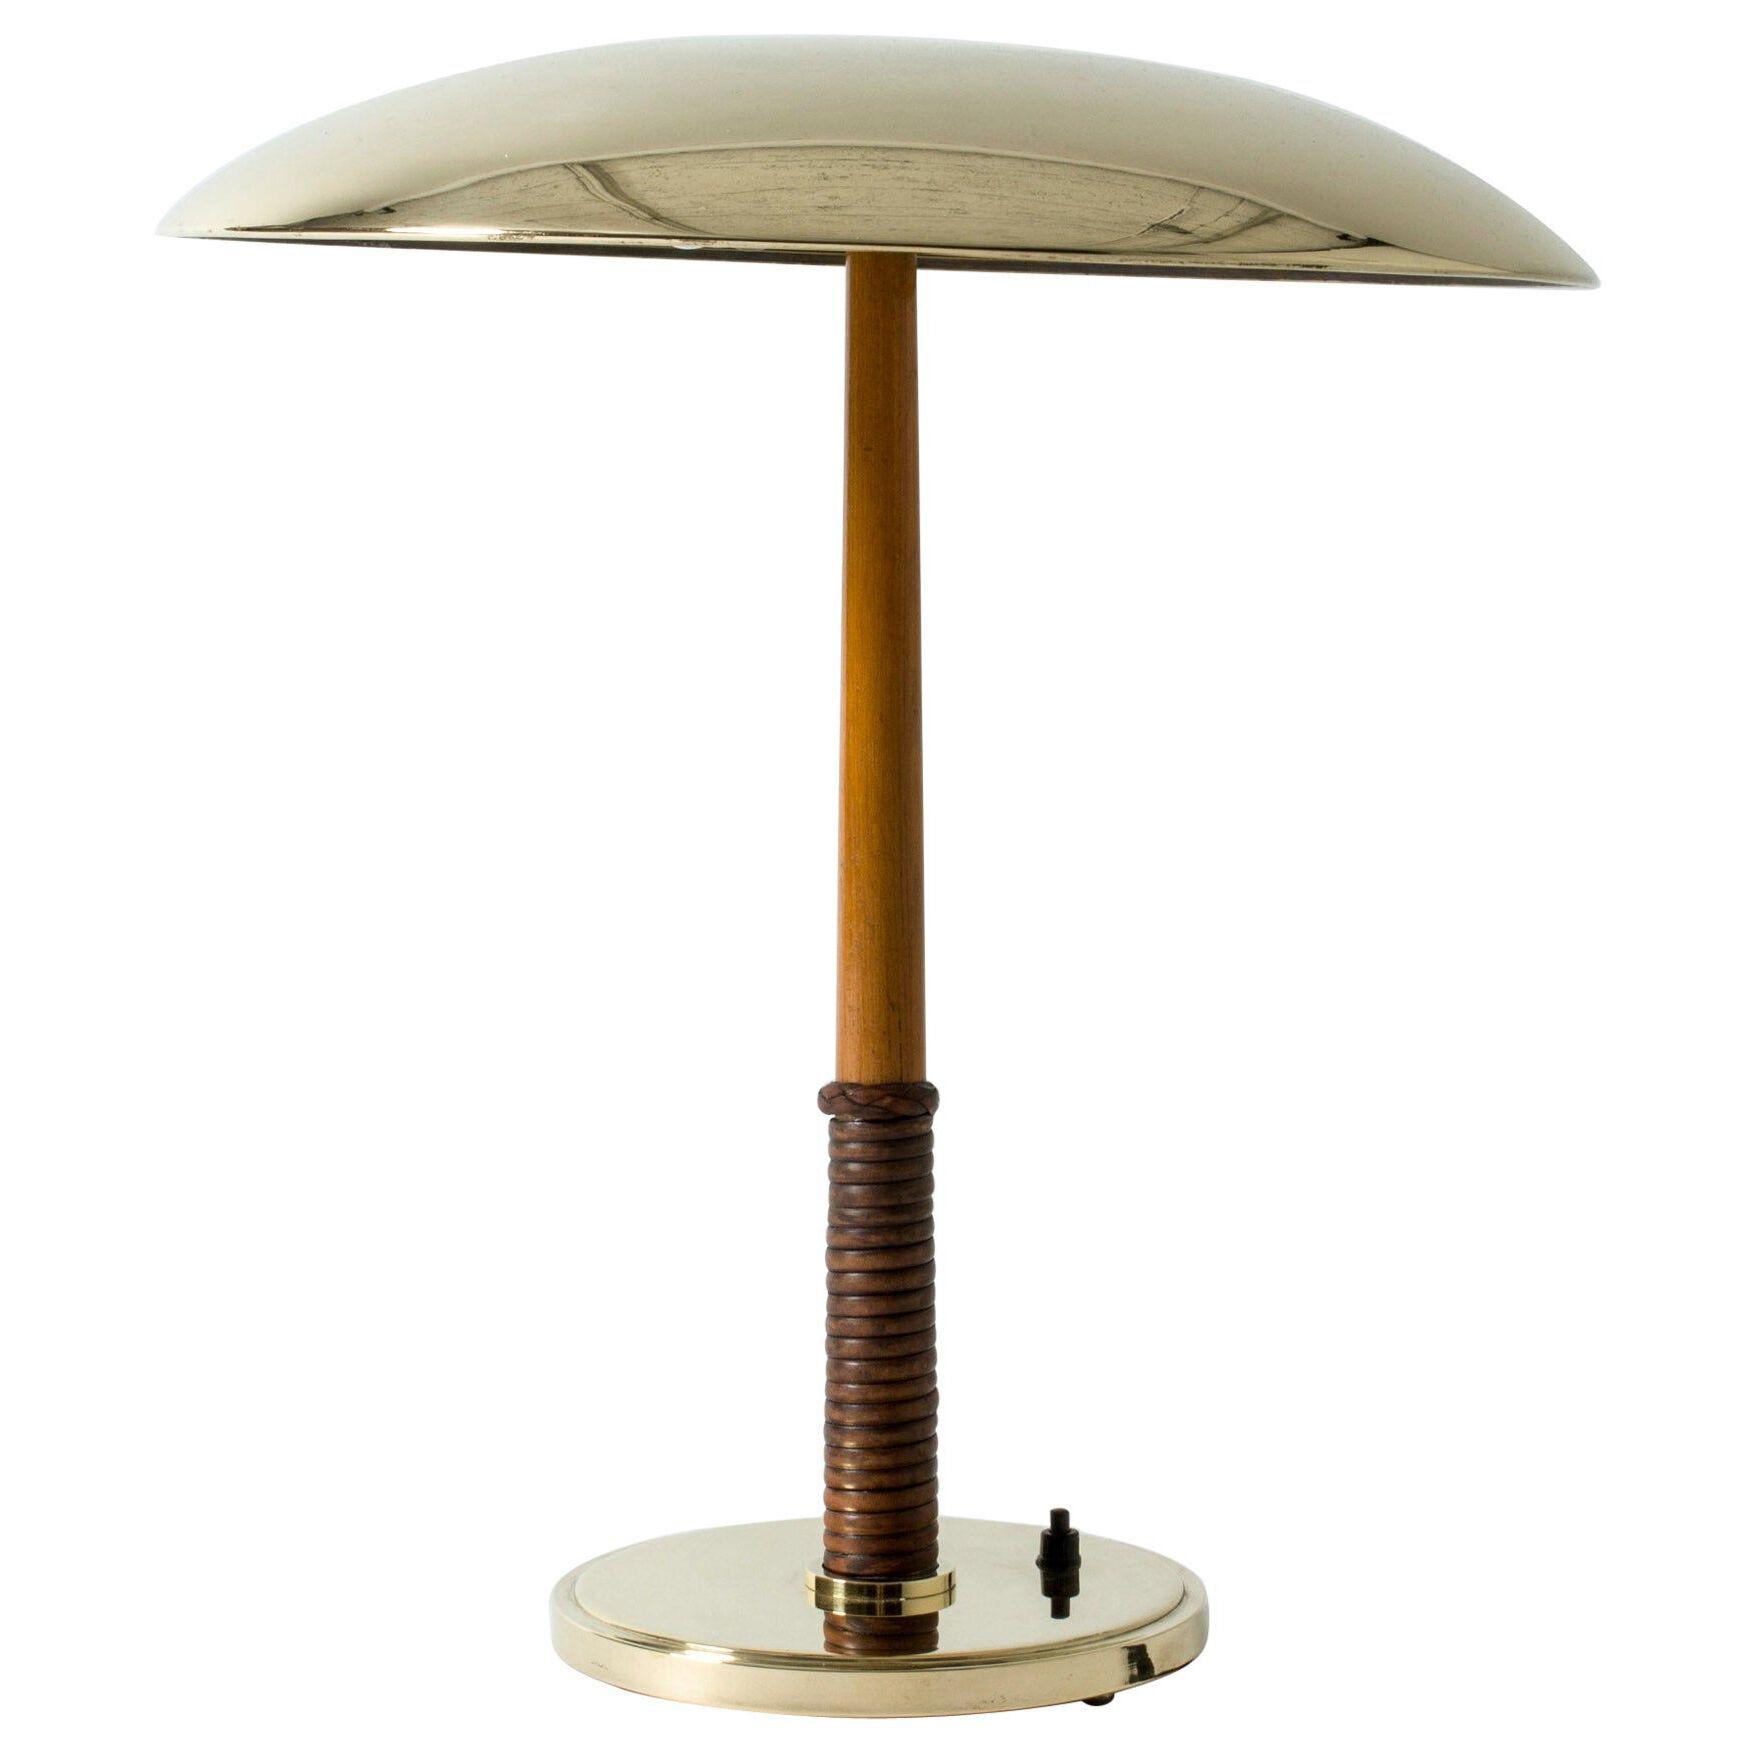 Brass, Mahogany and Leather Table Lamp from Böhlmarks, Sweden, 1940s